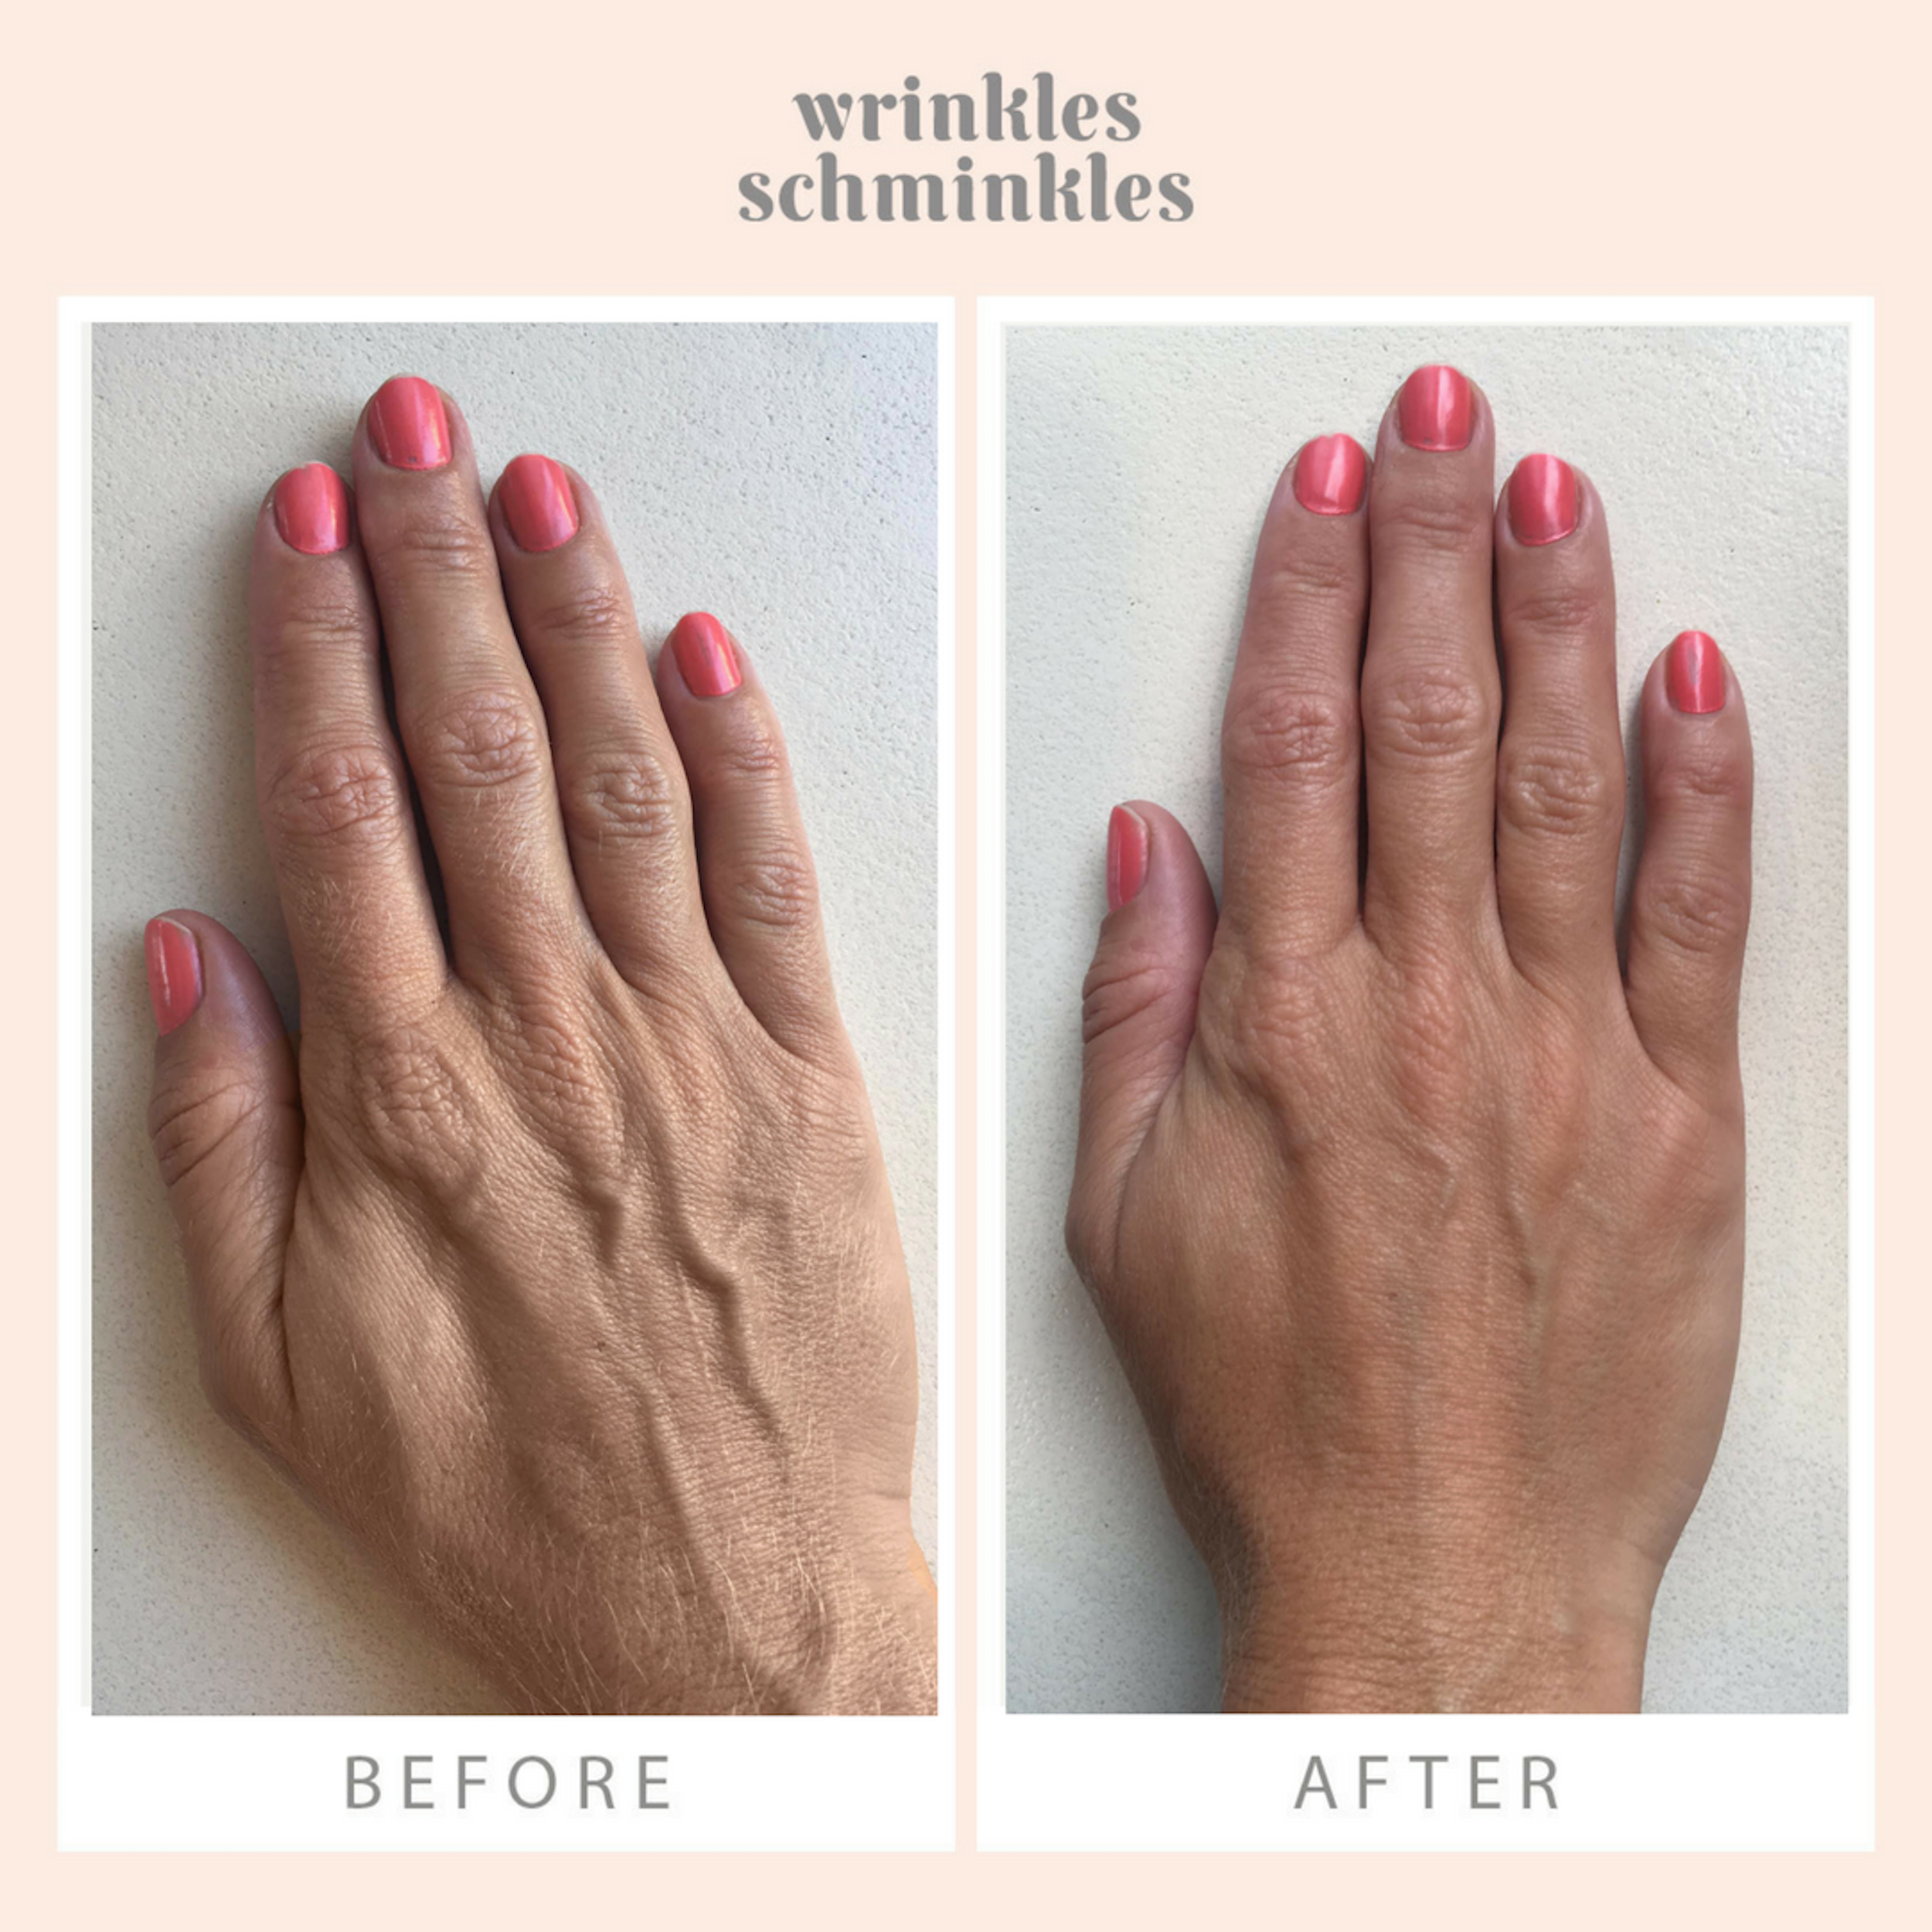 Wrinkles Schminkles Hand Wrinkle Patches Kit (2 Patches)